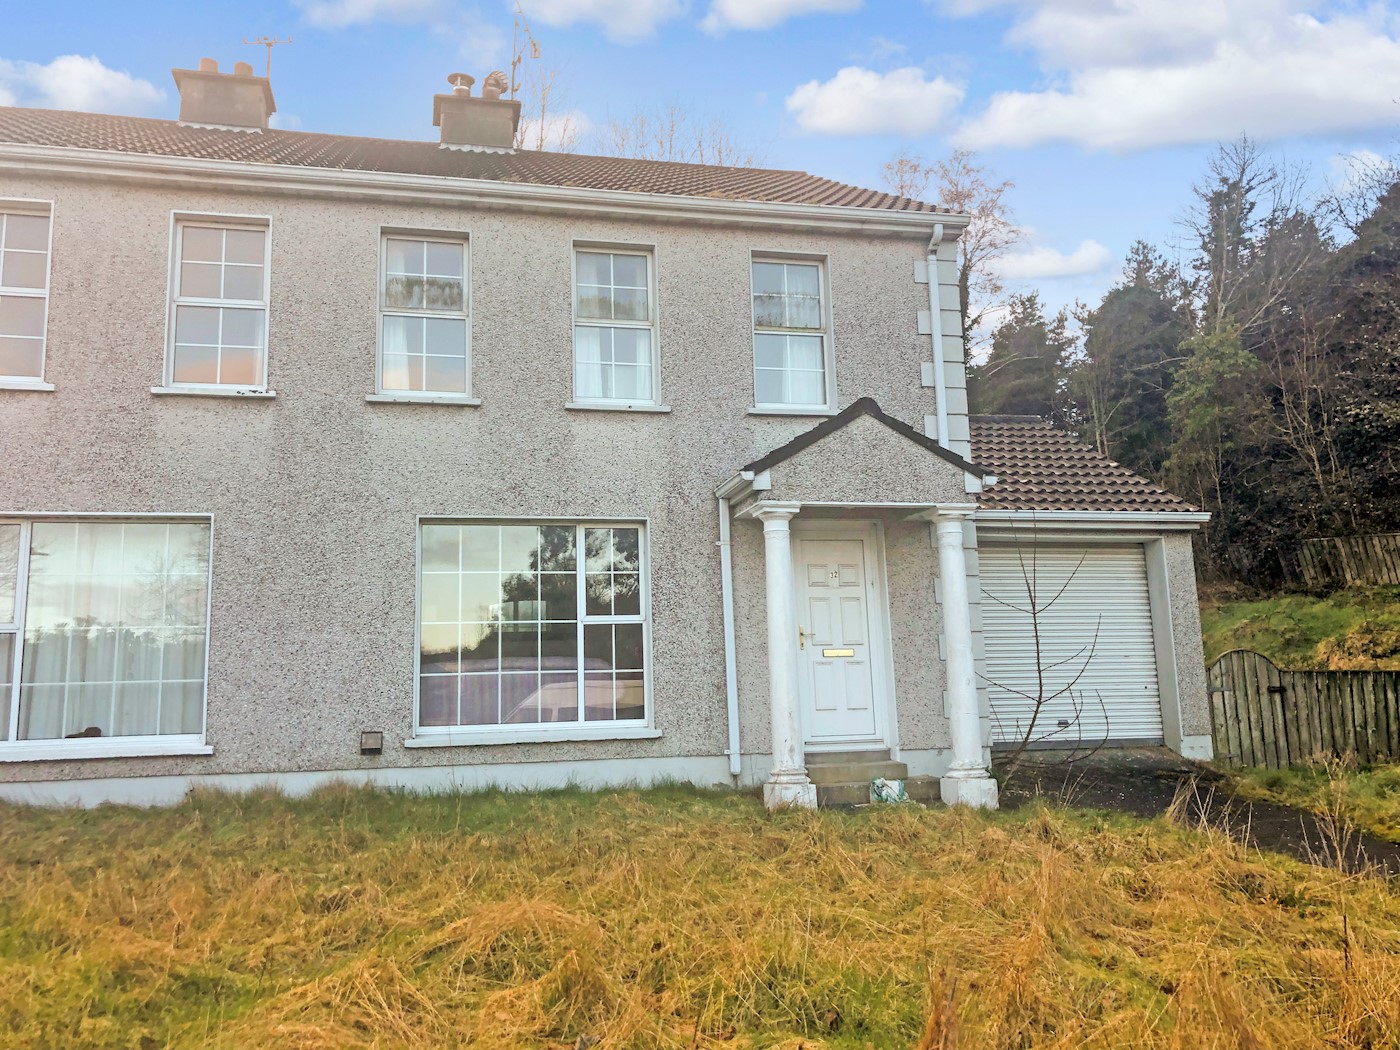 32 Elmwood Downes, Letterkenny, Co. Donegal, F92 DTW0 1/7